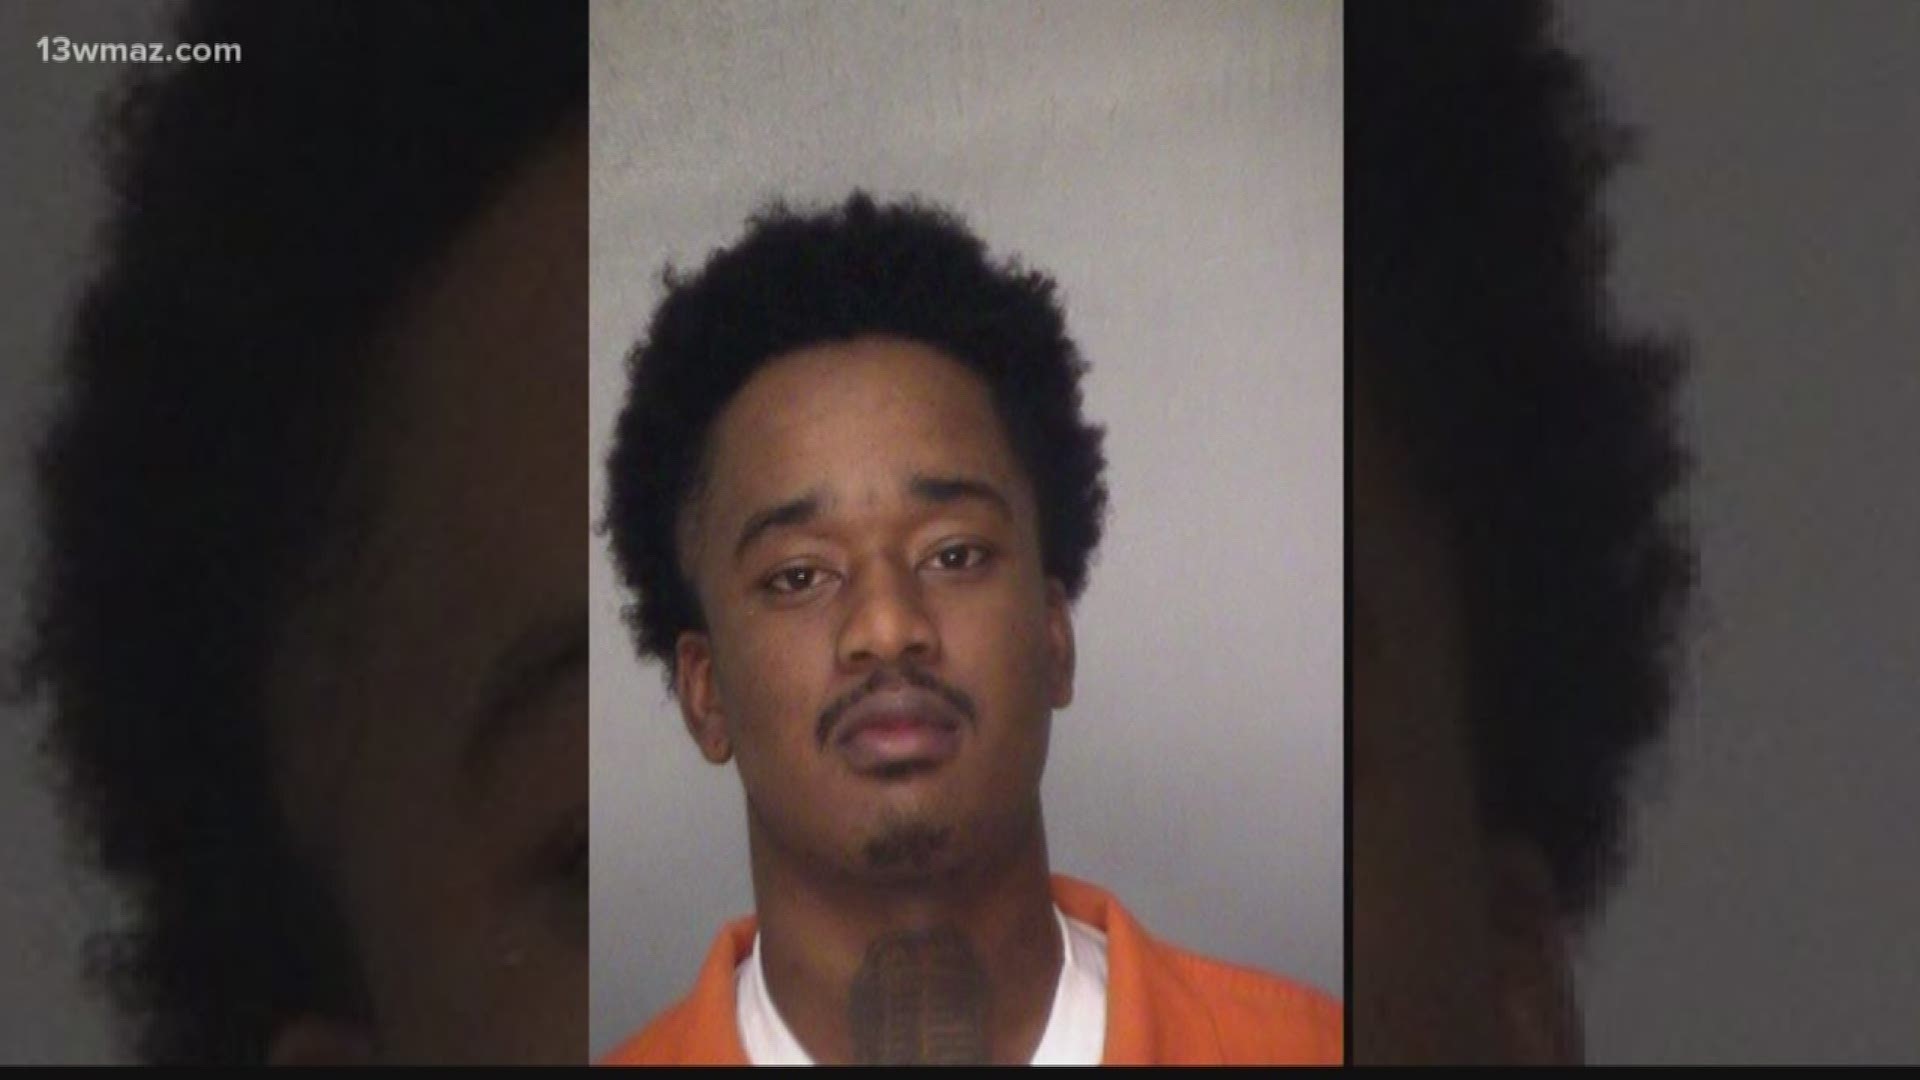 A Macon man deputies thought was a victim, is now charged as a suspect in a November shooting. Last month deputies found Robreon Lee with a gunshot wound.